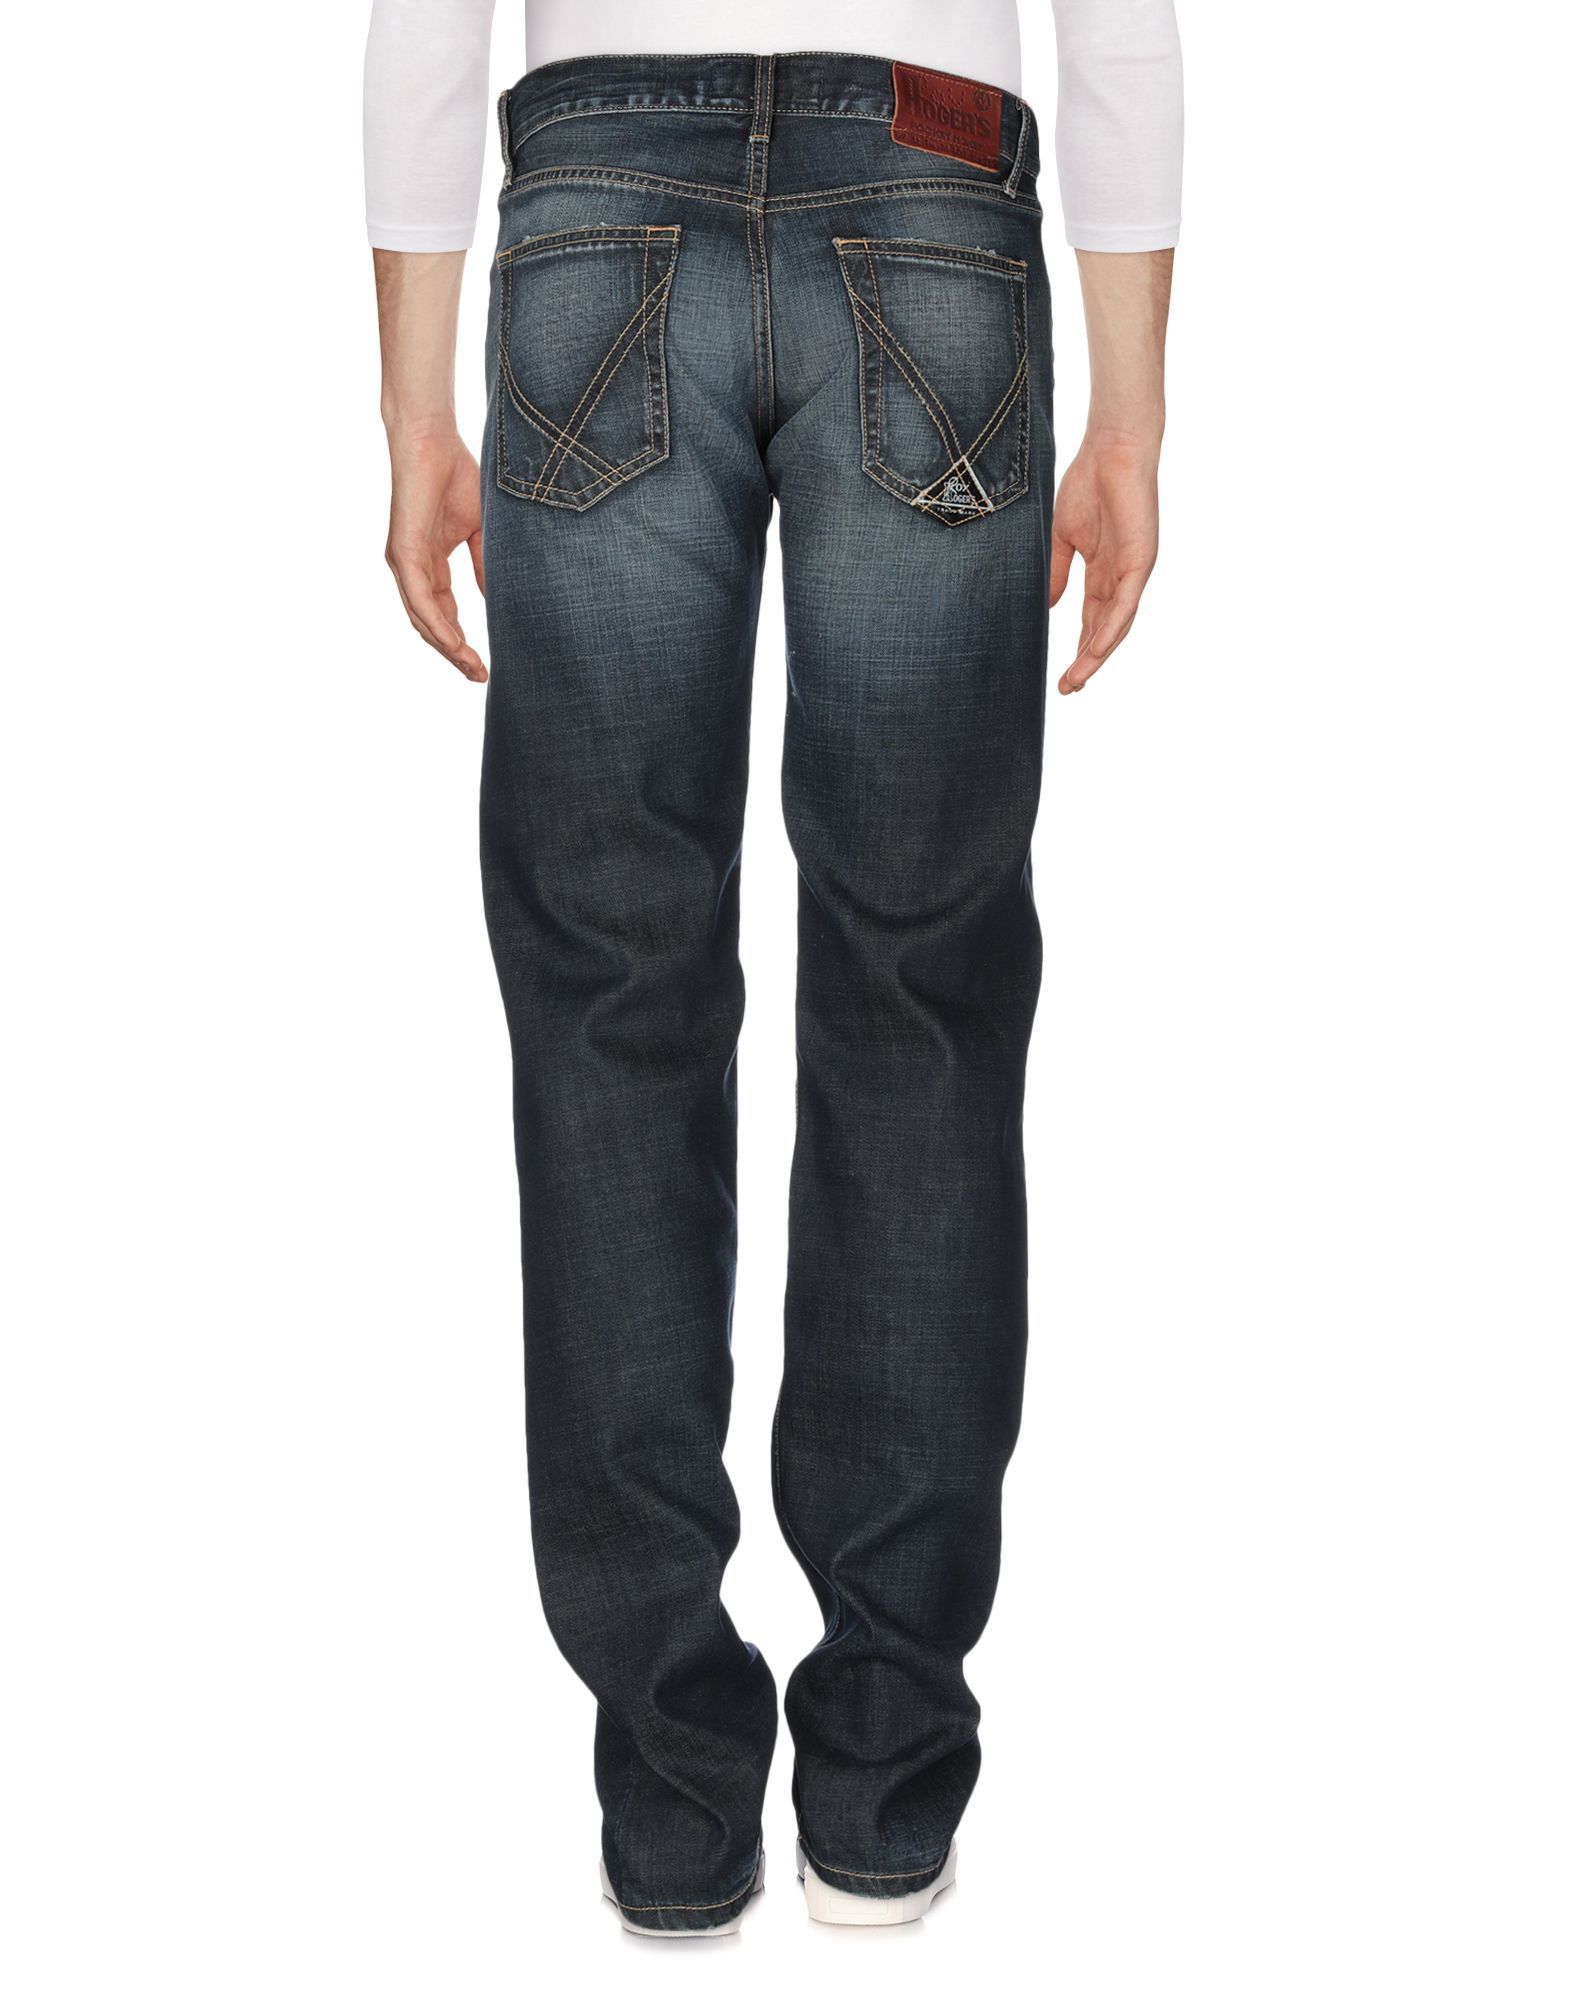 denim, faded, logo, leather applications, solid colour, dark wash, mid rise, front closure, button closing, multipockets, contains non-textile parts of animal origin, straight-leg pants